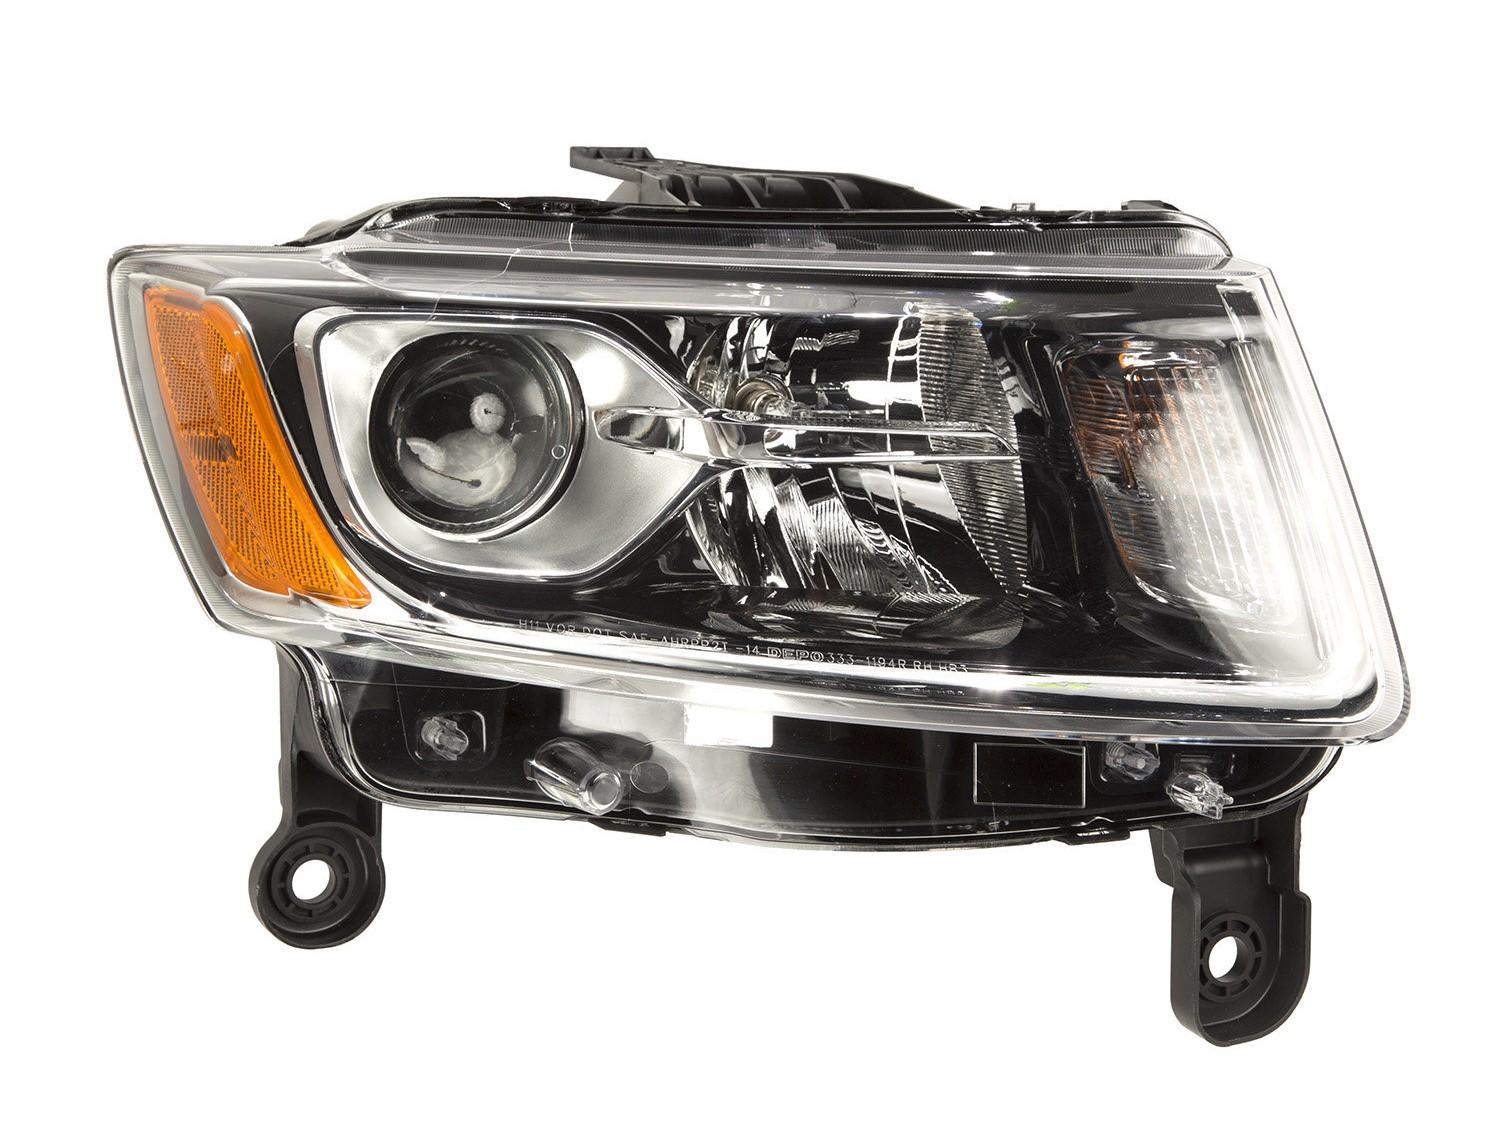 Headlight Replacement: Everything You Need To Know